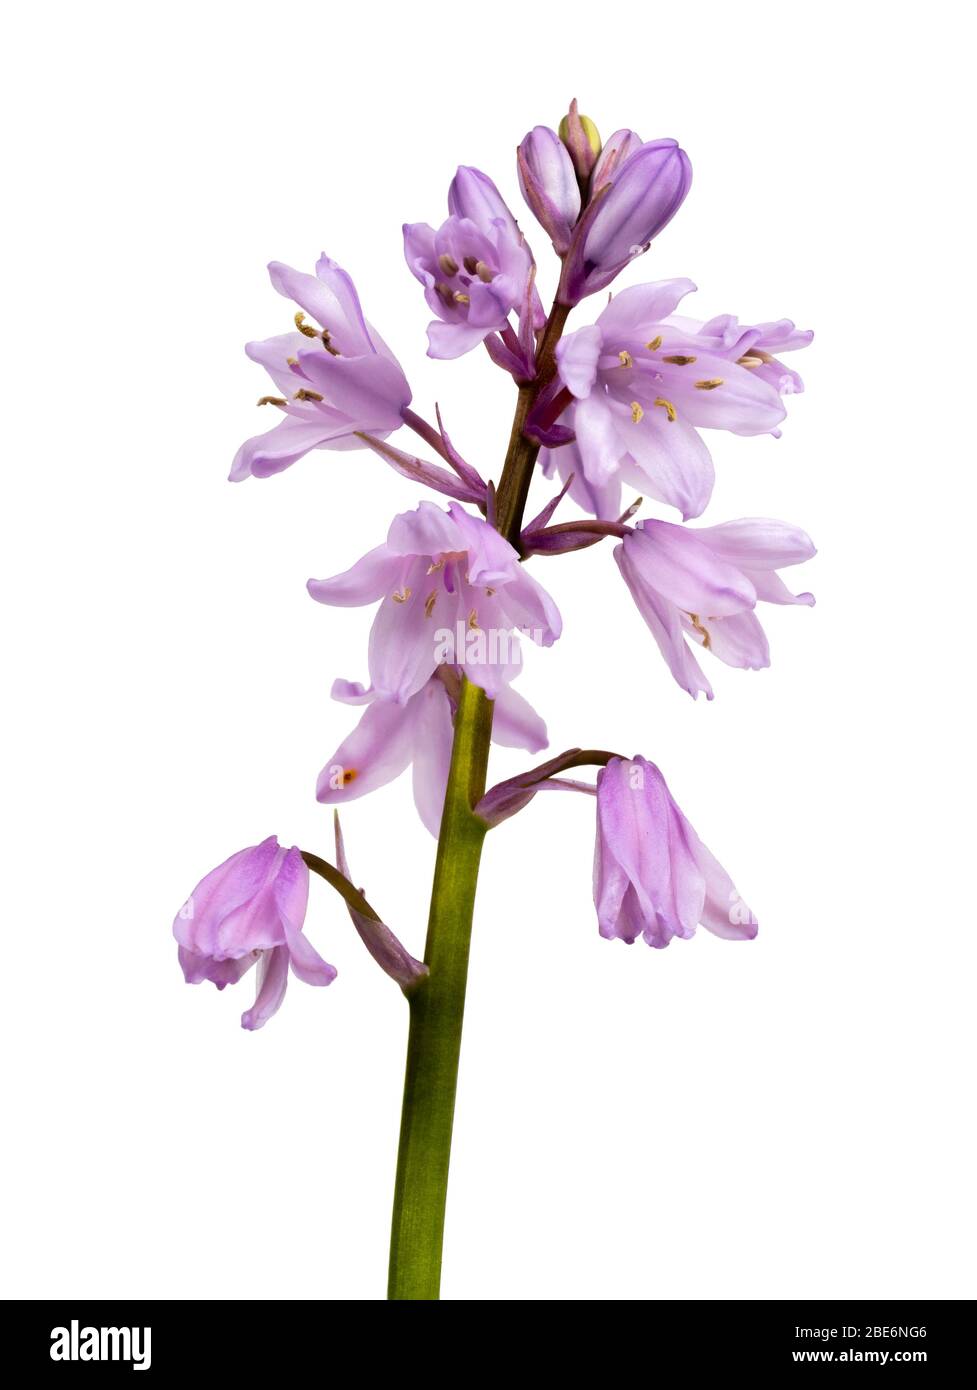 Pink flowered form of the Spanish  and English bluebell cross, Hyacinthoides x massartiana, on a white background Stock Photo